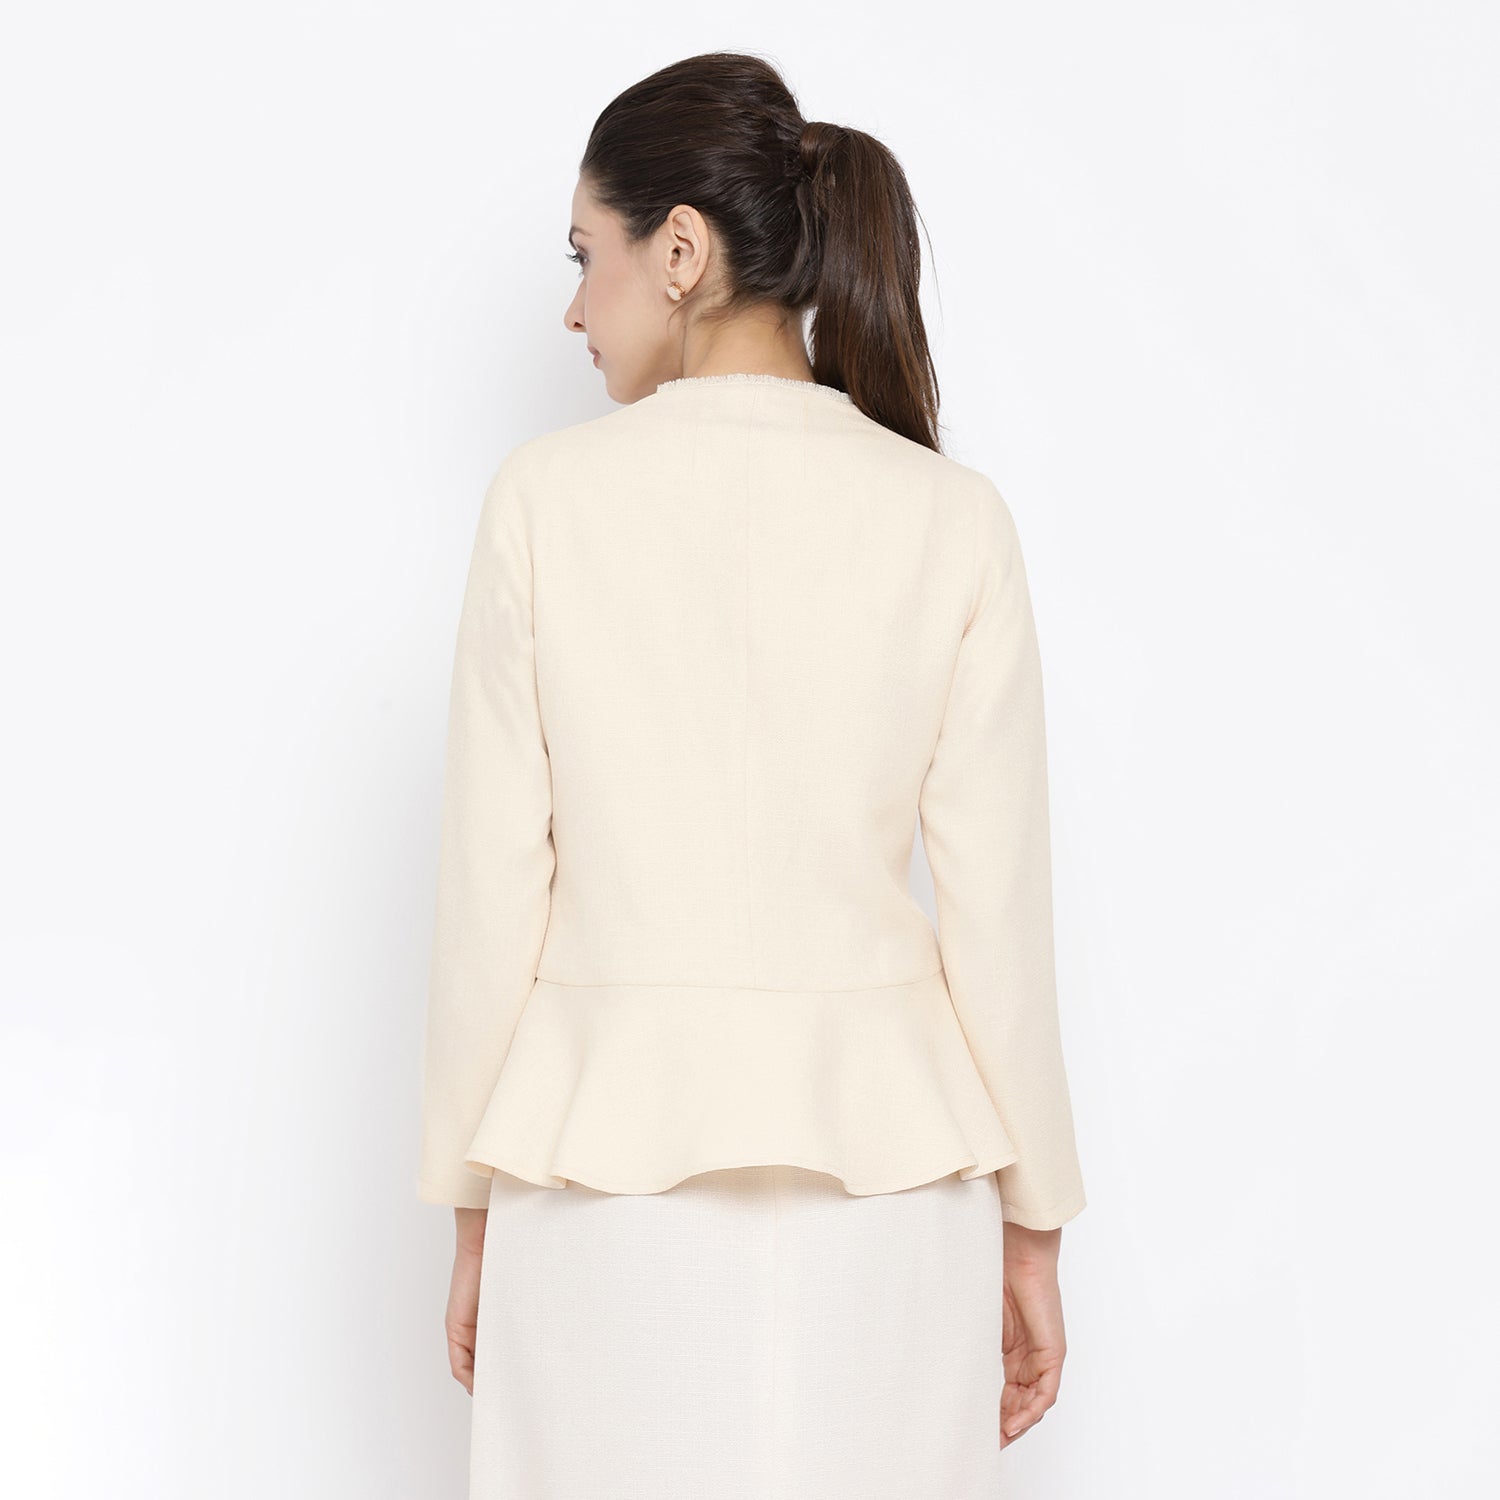 Off White Silk Linen Jacket With Fringes